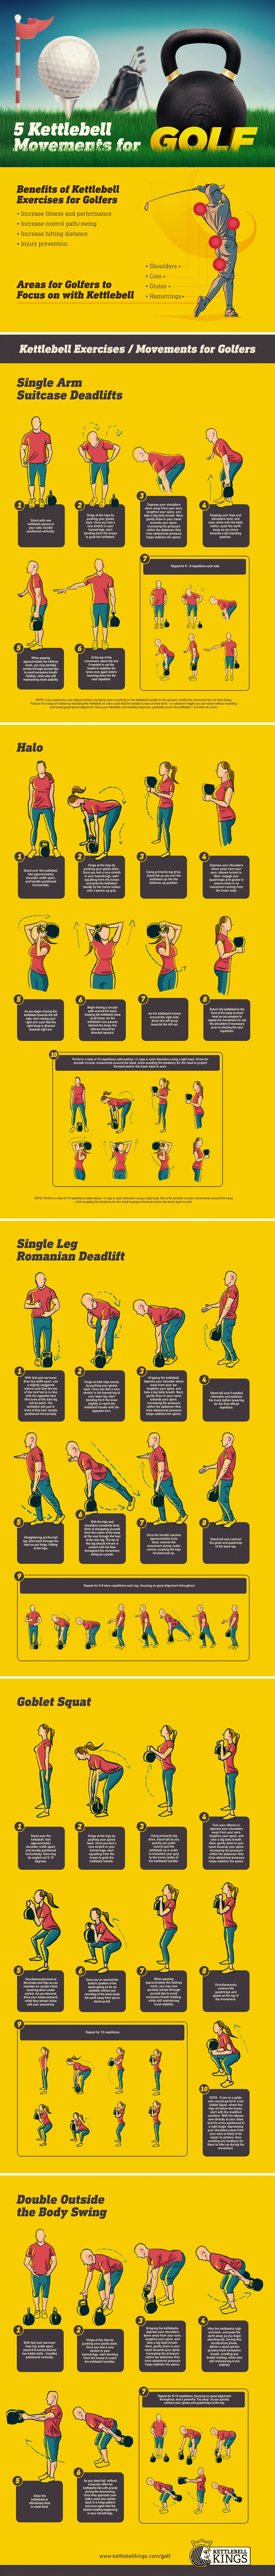 Kettlebell Movements for Golfers Infographic